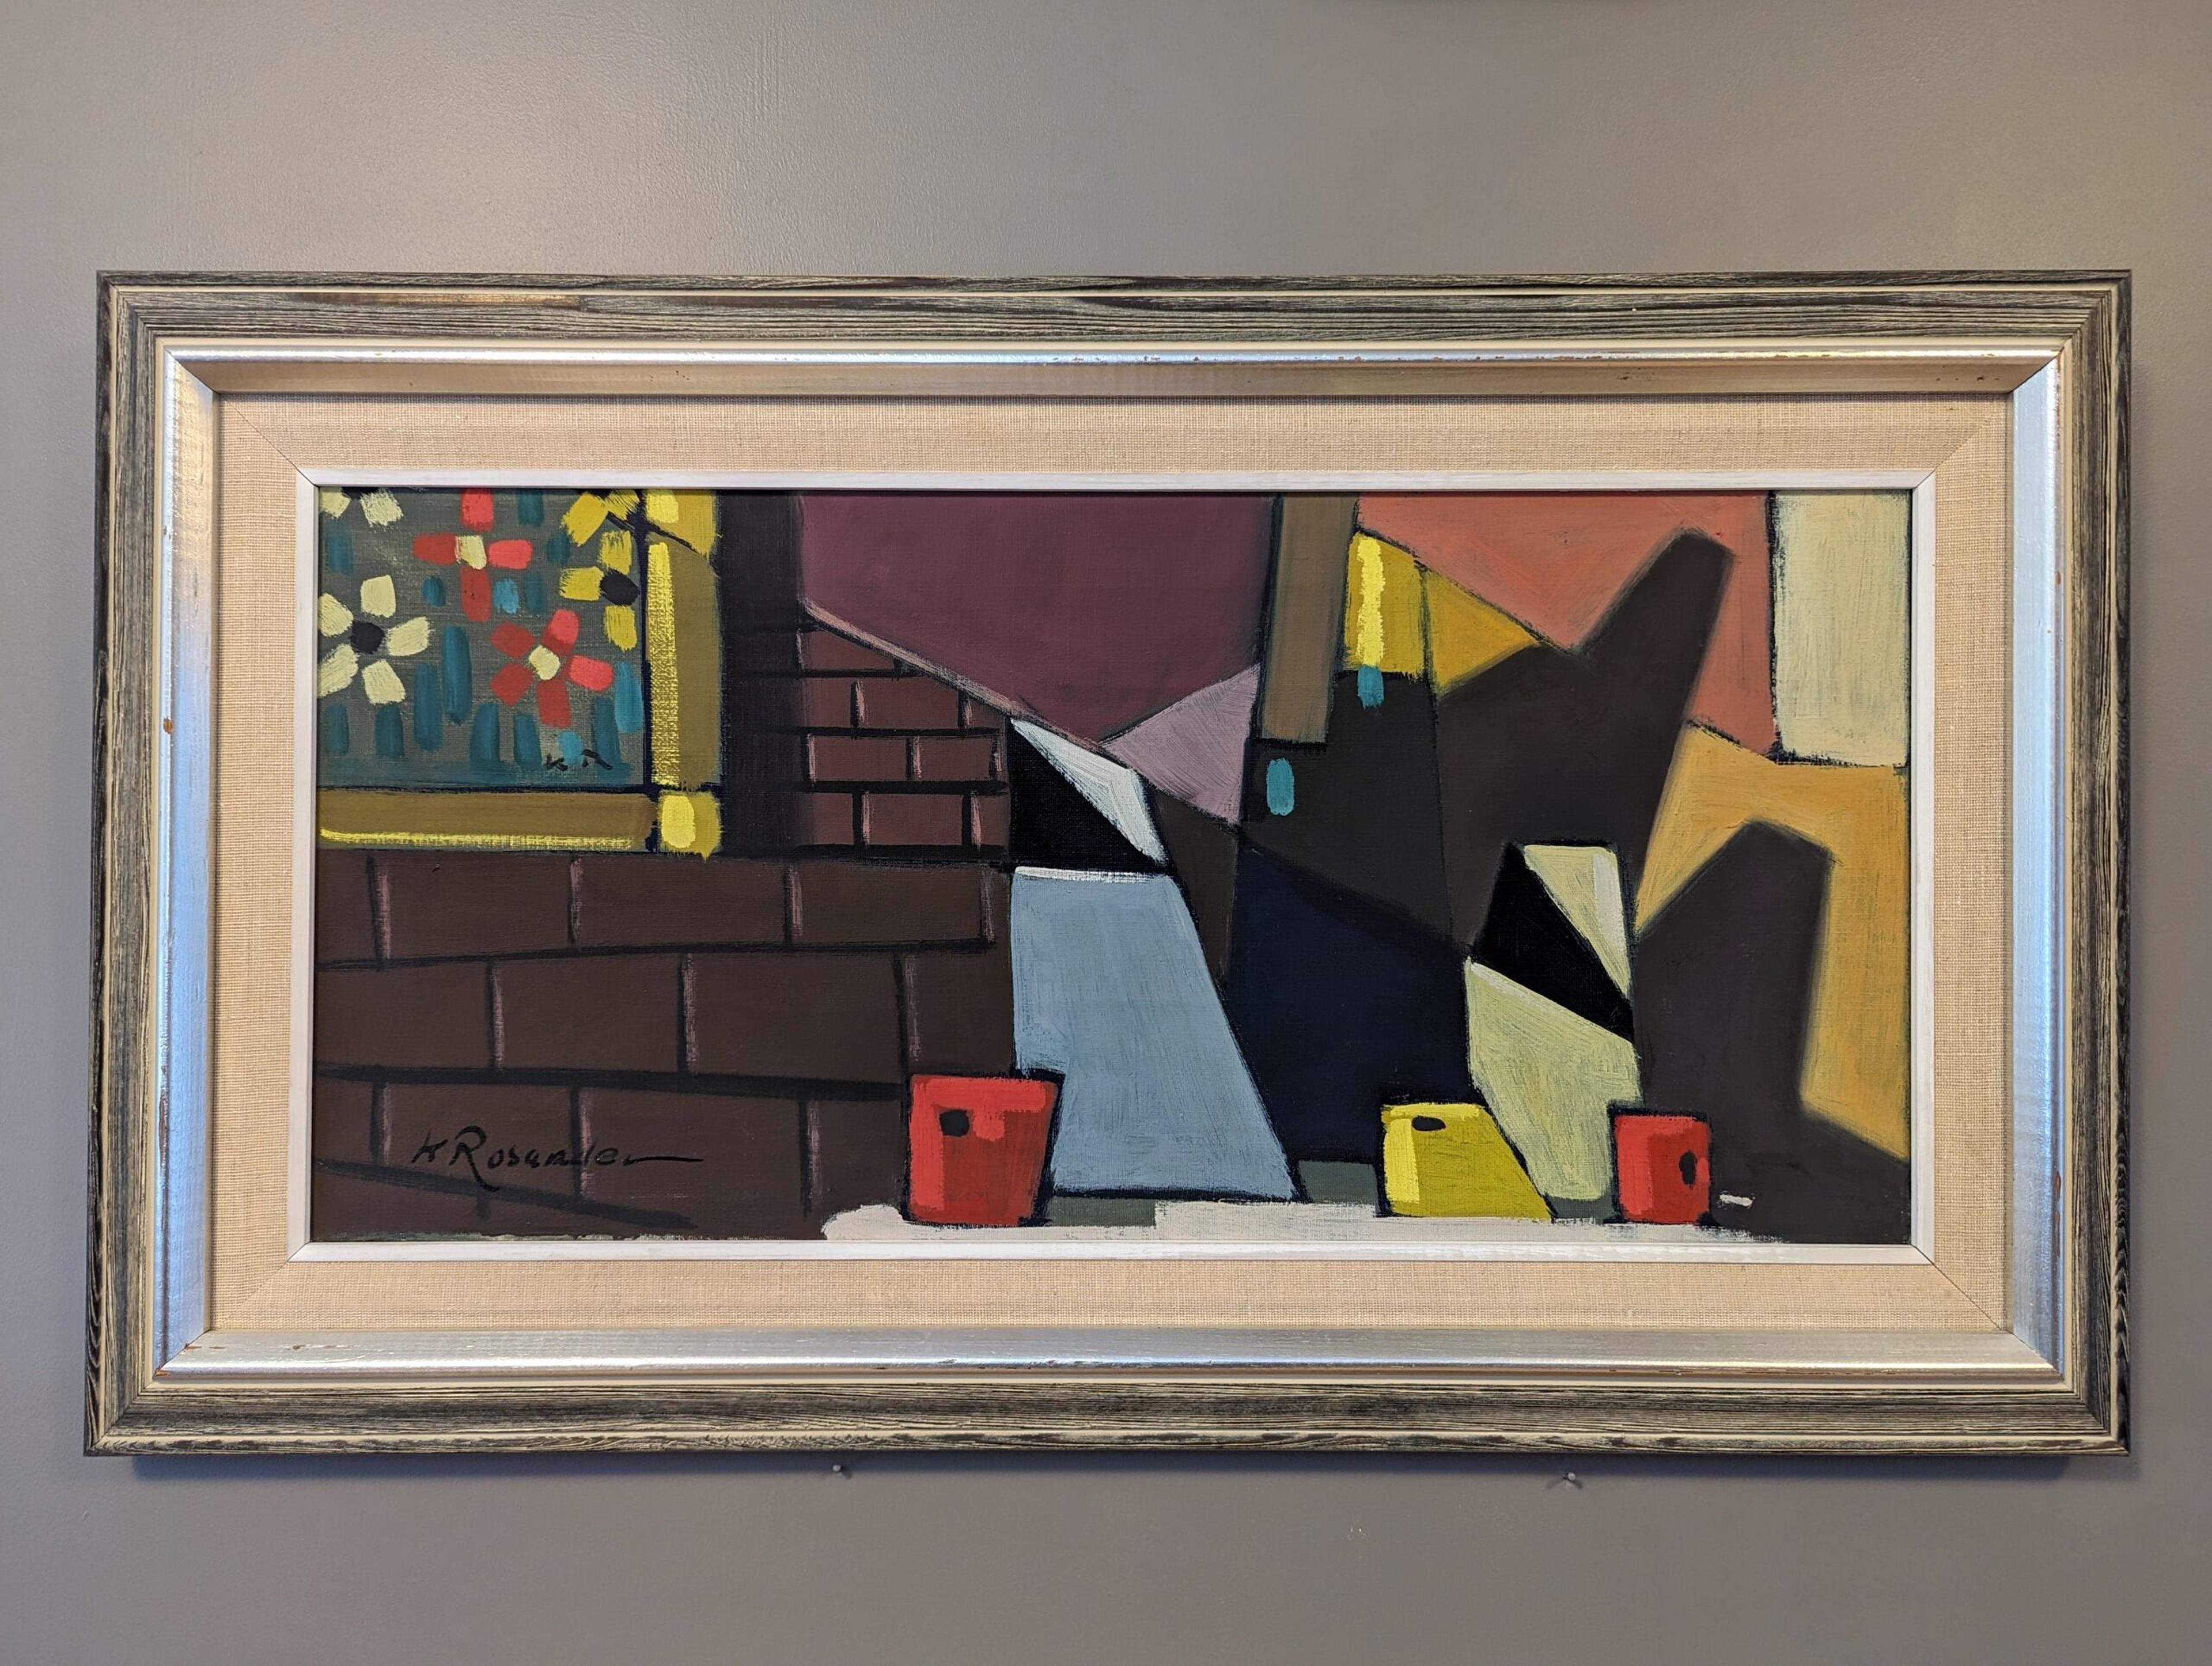 CUBIST JUGS
Oil on Canvas
Size: 41.5 x 71.5 cm (including frame)

A rich and vivid modernist composition, painted in oil onto canvas.

With a myriad of bold and striking colours in a series of geometric shapes, we can discern an interior scene. A